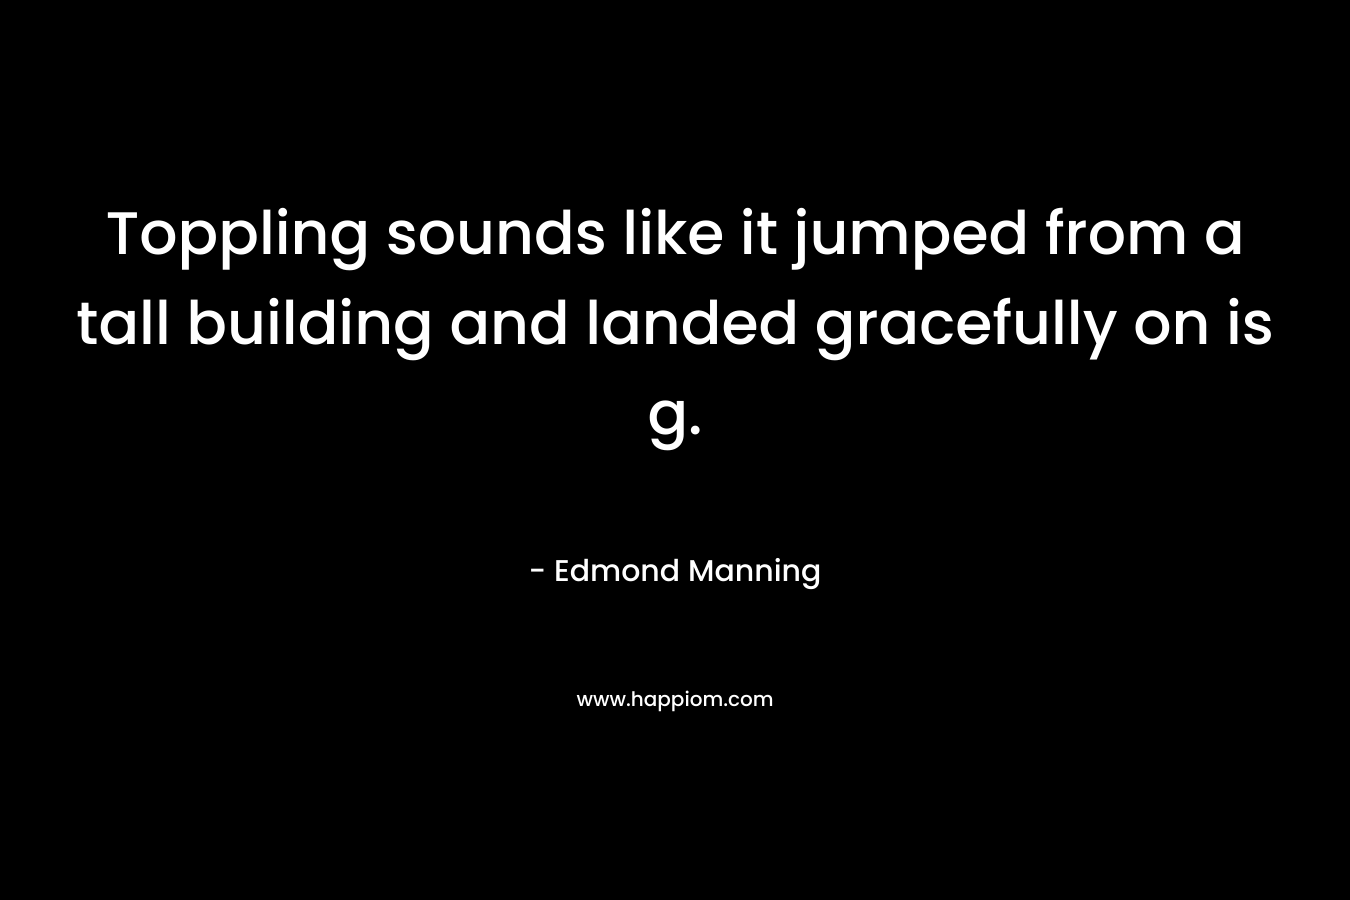 Toppling sounds like it jumped from a tall building and landed gracefully on is g.